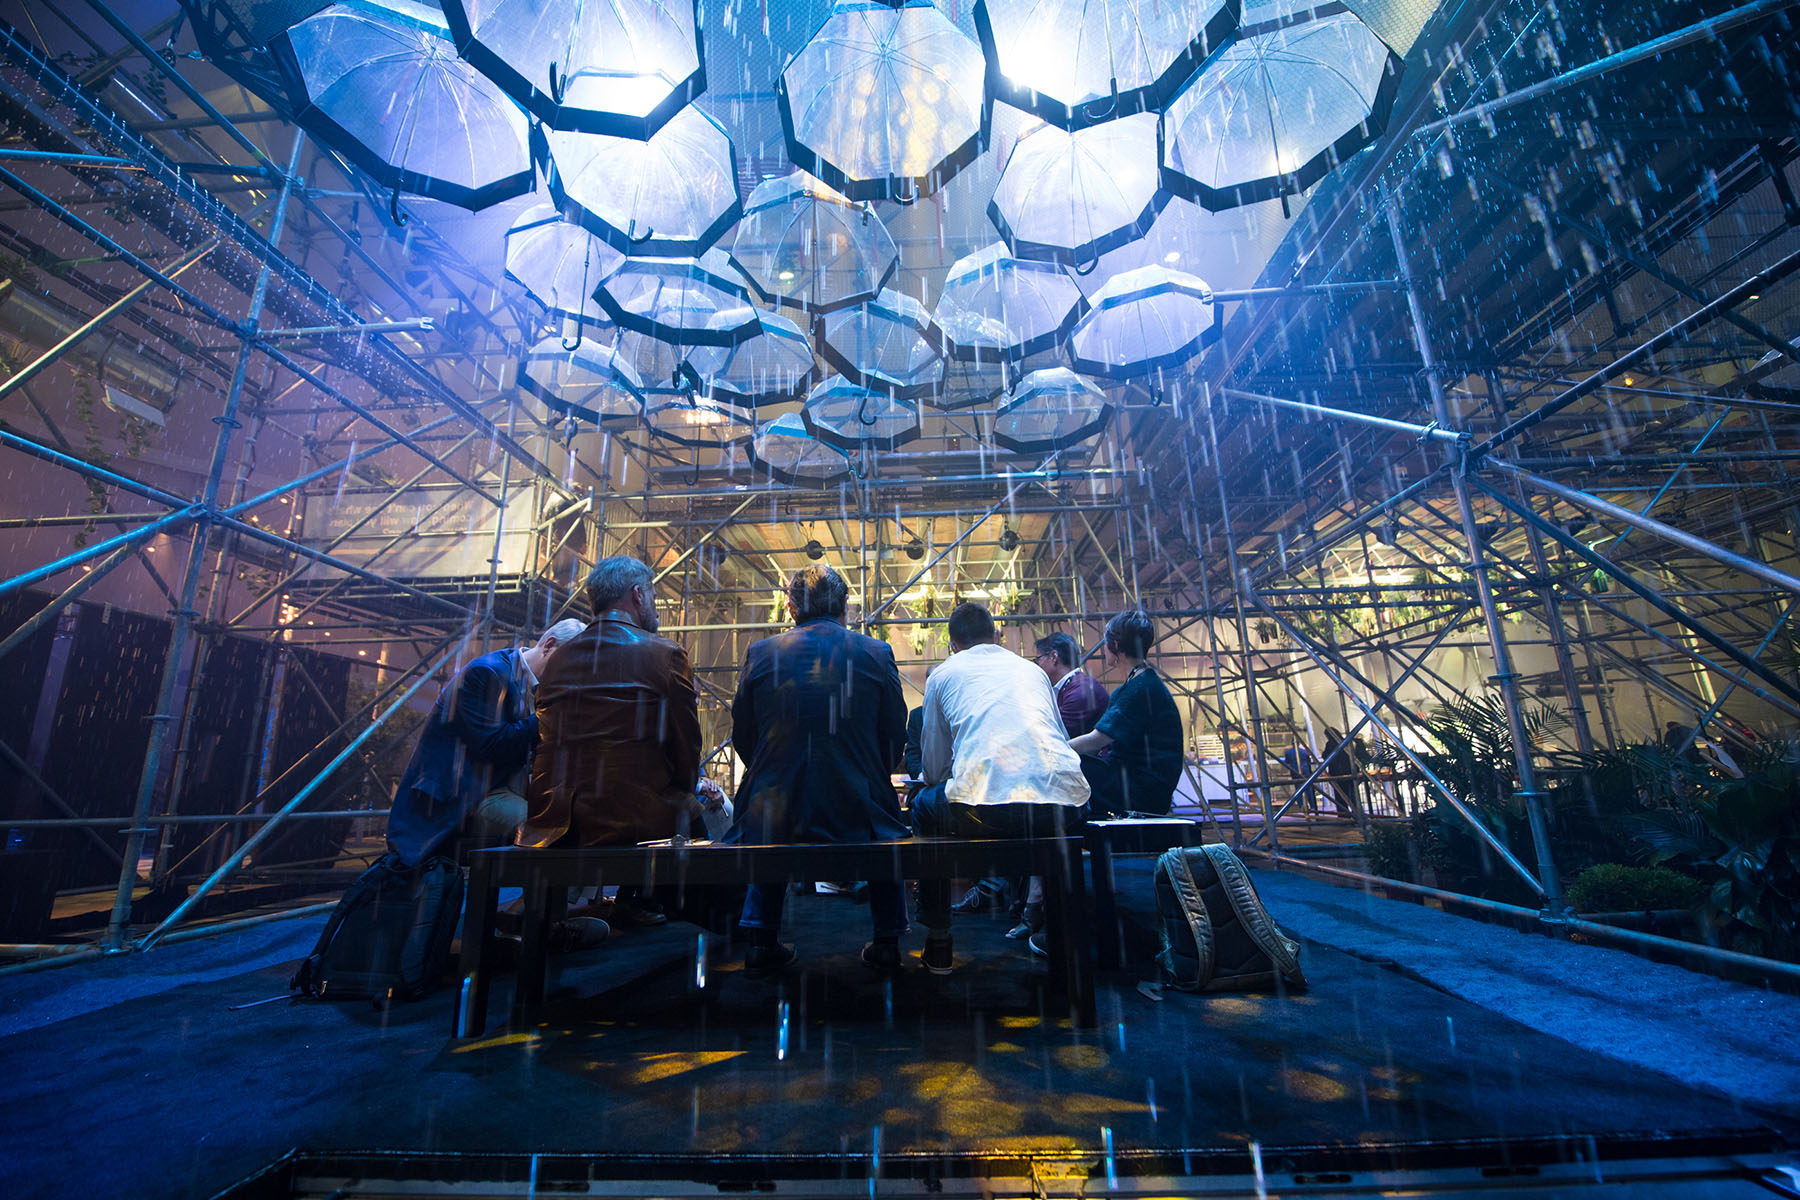 People sit under umbreallas at Innovation realized